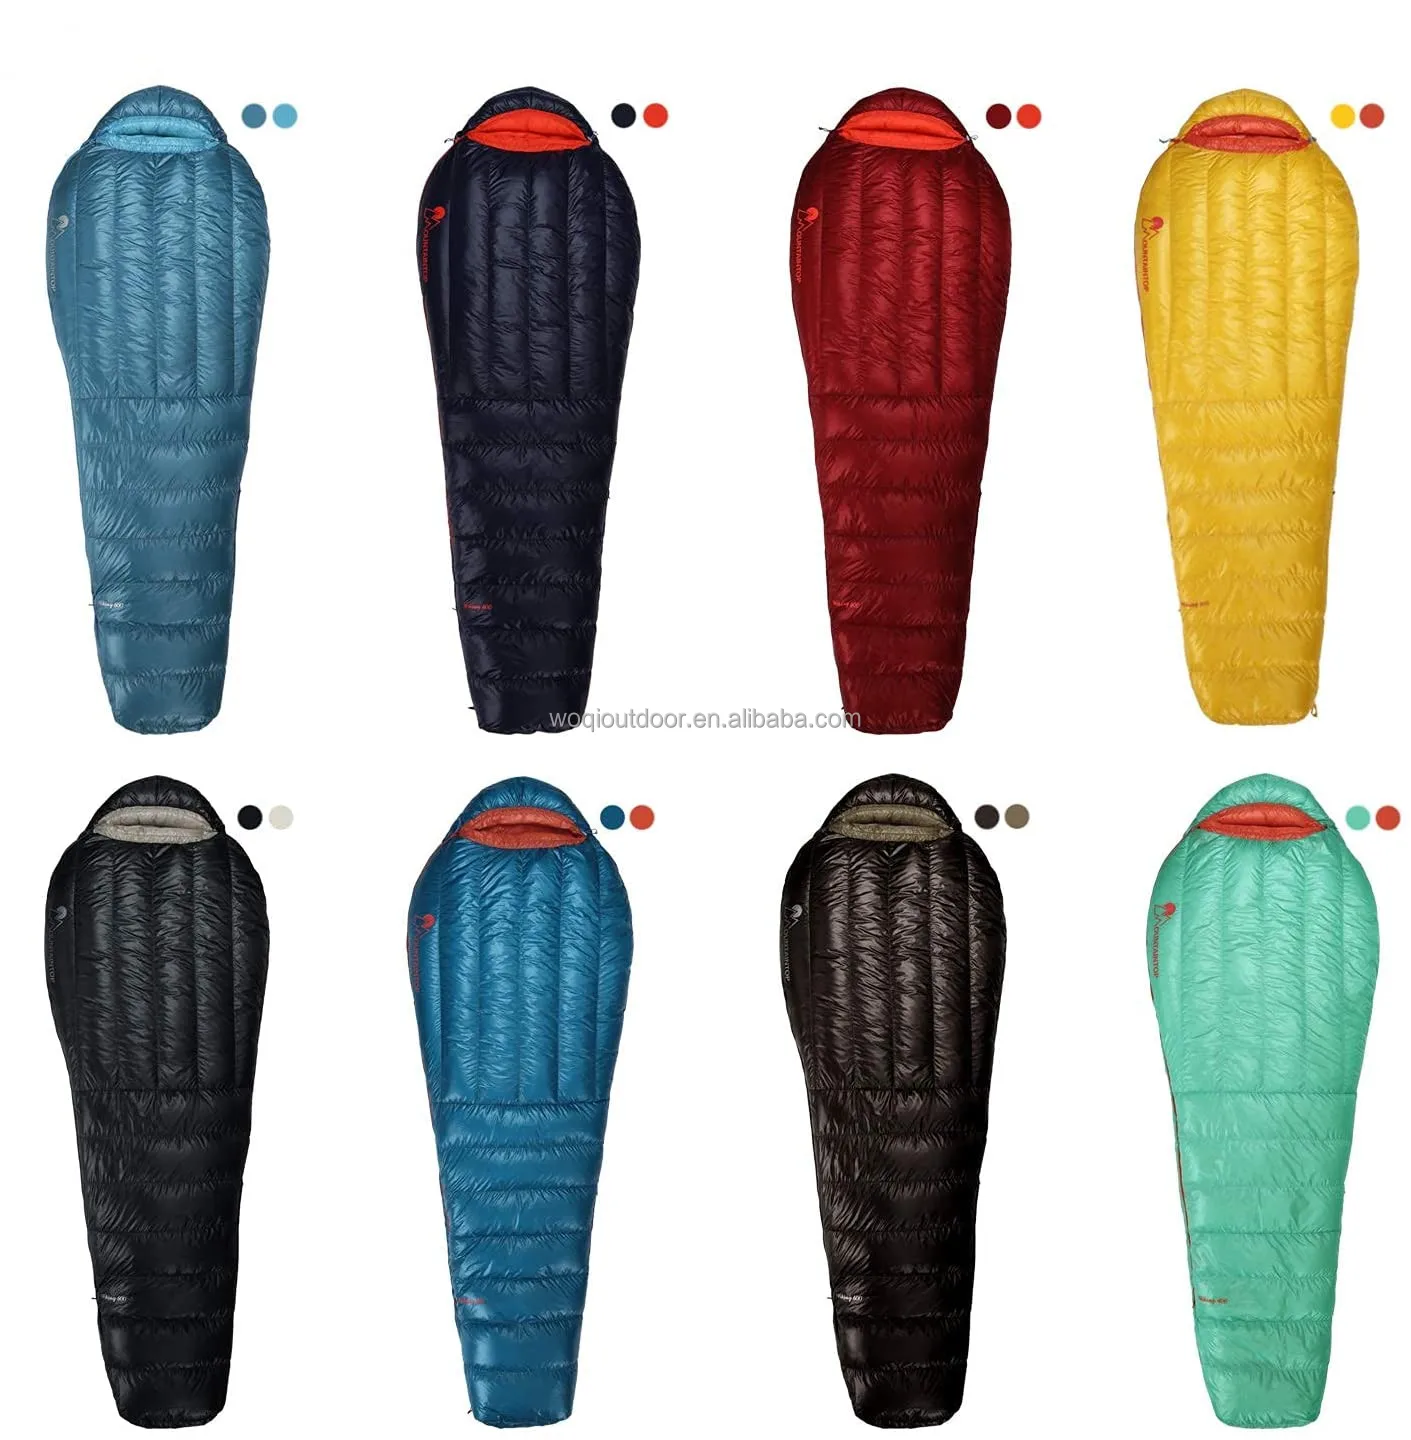 Wq Mummy Sleeping Bags 650 Fill Power Duck Down Suits For 41